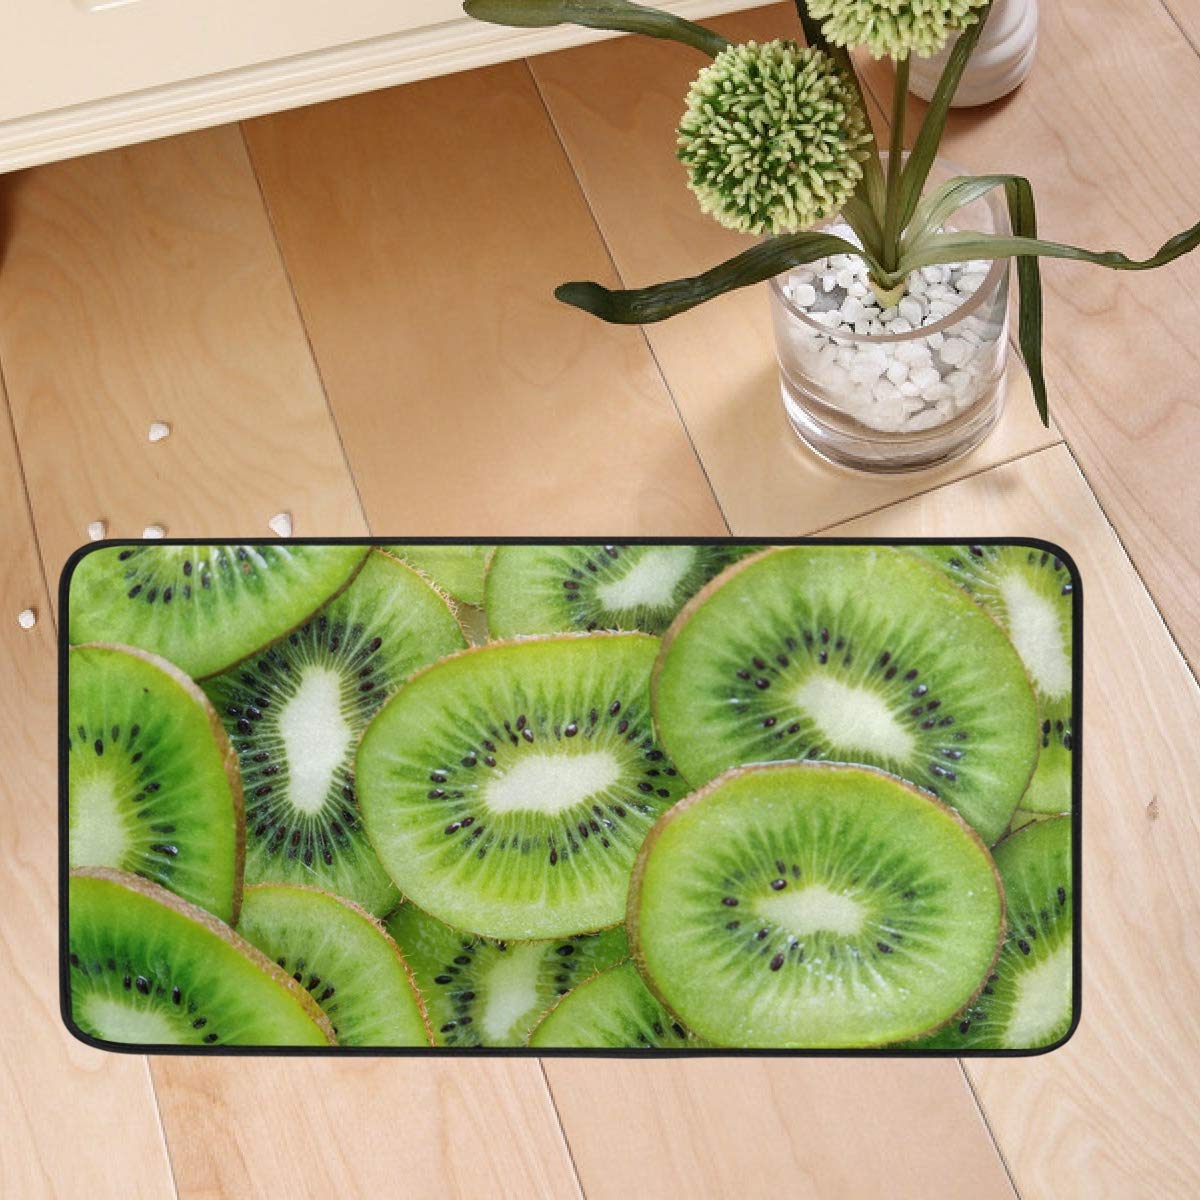 DOMIKING Kitchen Mat Floor Rug - Green Kiwi Fruit Non Slip Kitchen Mats Cushioned Washable Anti-Fatigue Office Chair Mat 20x20in for Home Decoration Bathroom Farmhouse